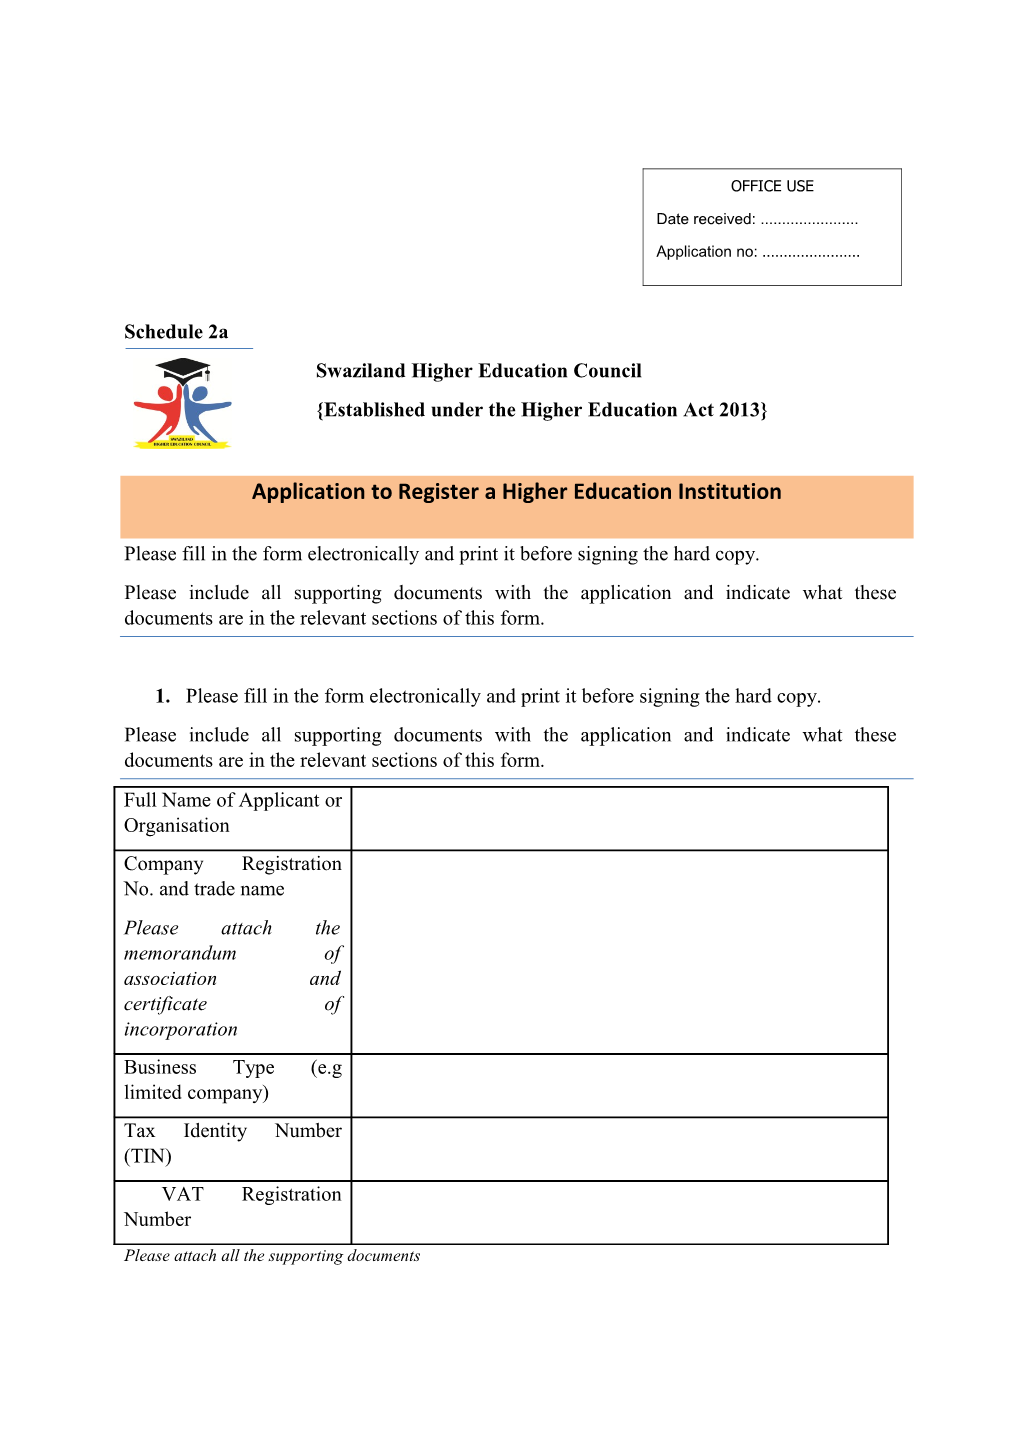 Please Fill in the Form Electronically and Print It Before Signing the Hard Copy